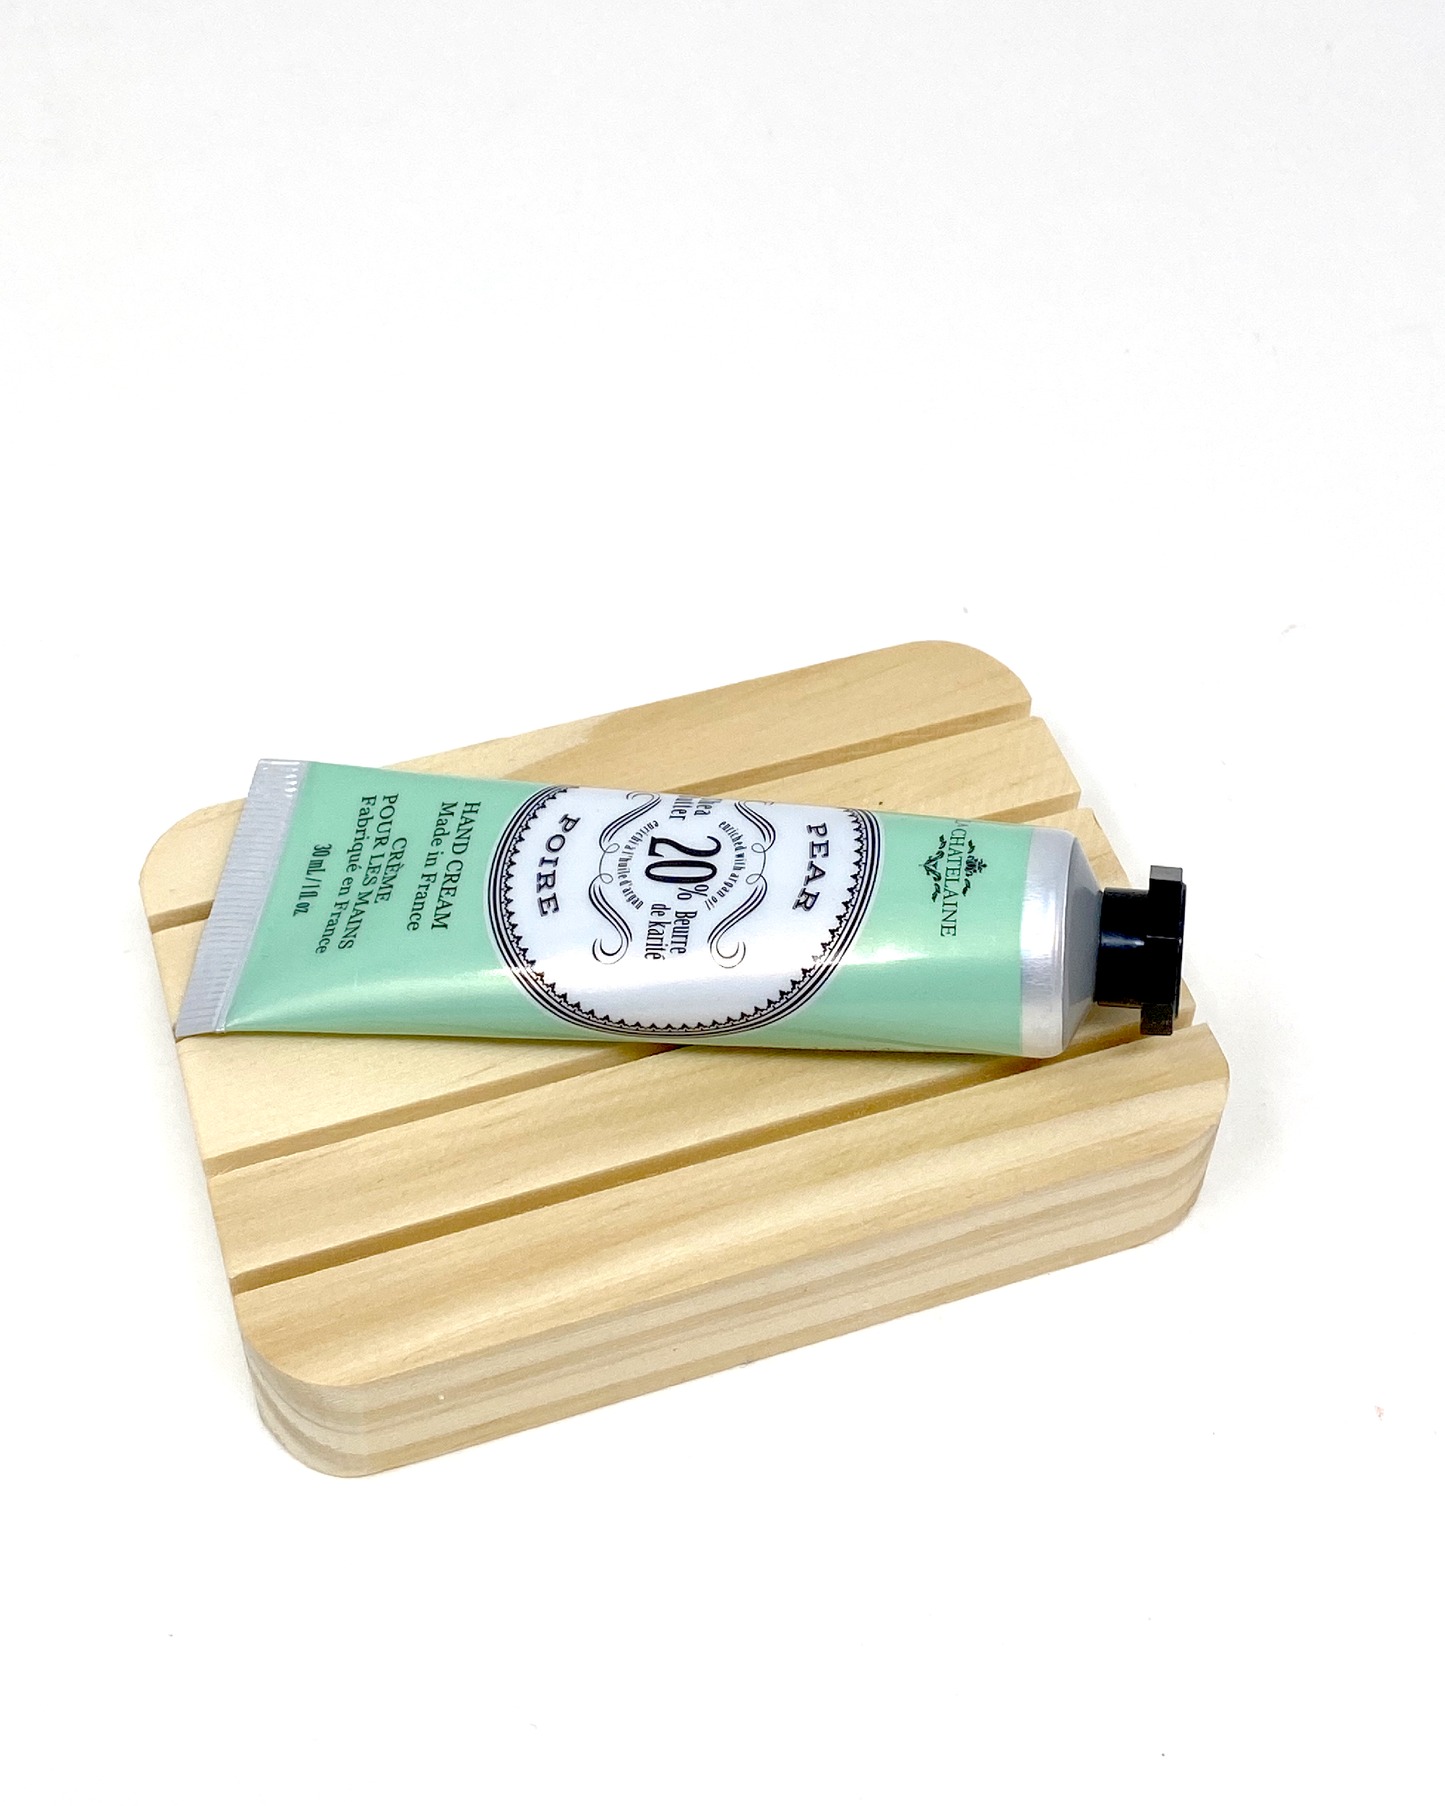 Pear hand lotion. Luxury hand lotion made with shea butter and argan oil. La Chatelaine hand lotion made in France